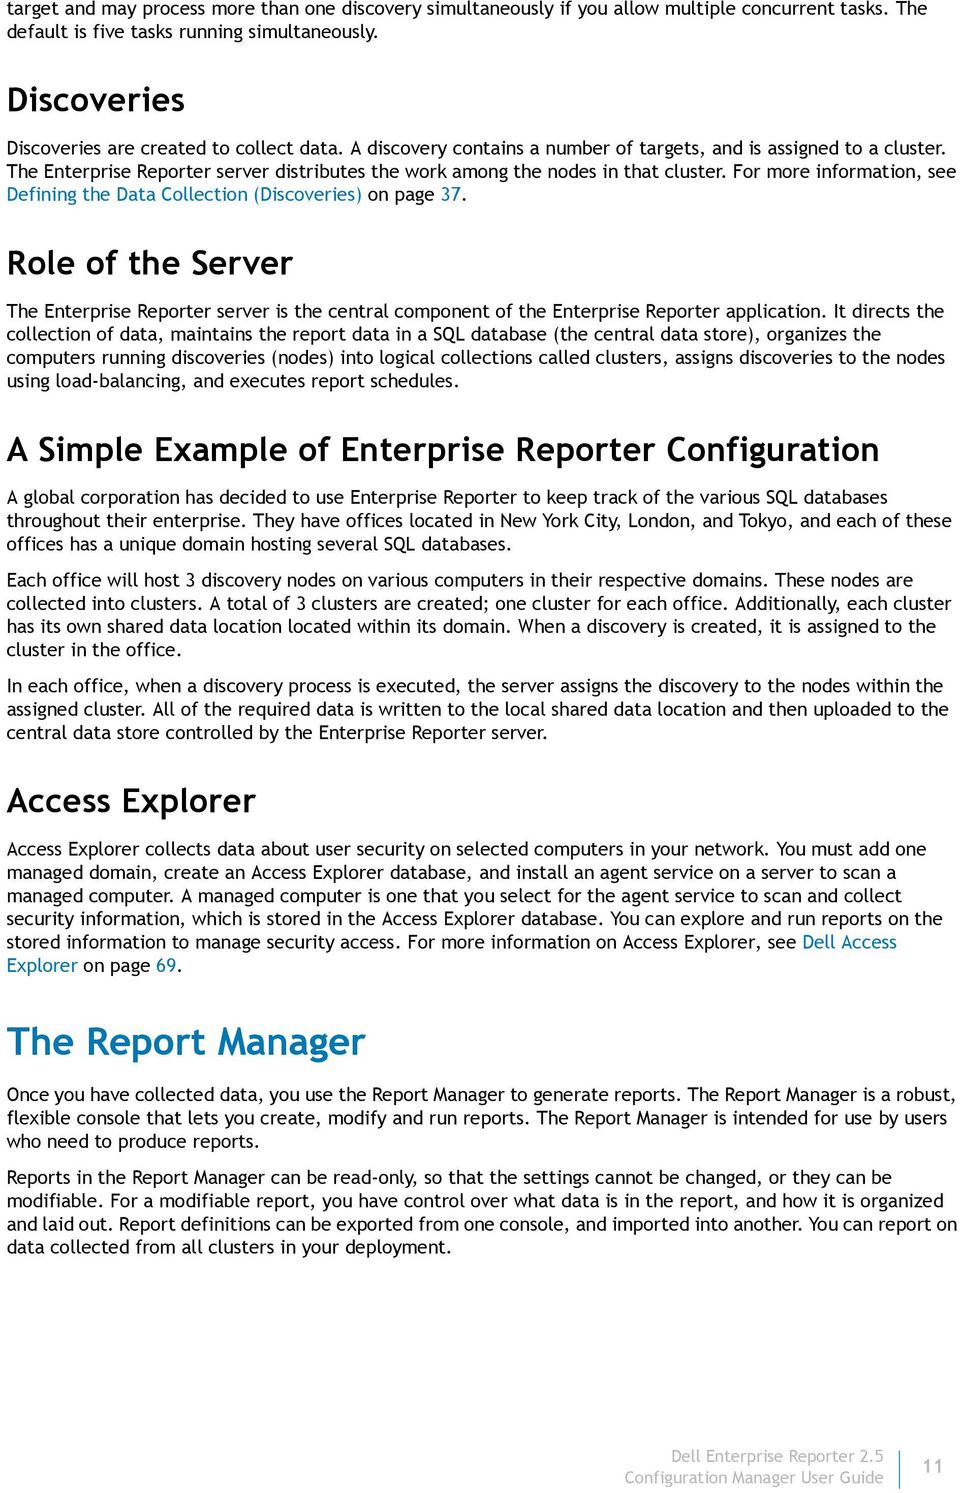 The Enterprise Reporter server distributes the work among the nodes in that cluster. For more information, see Defining the Data Collection (Discoveries) on page 37.